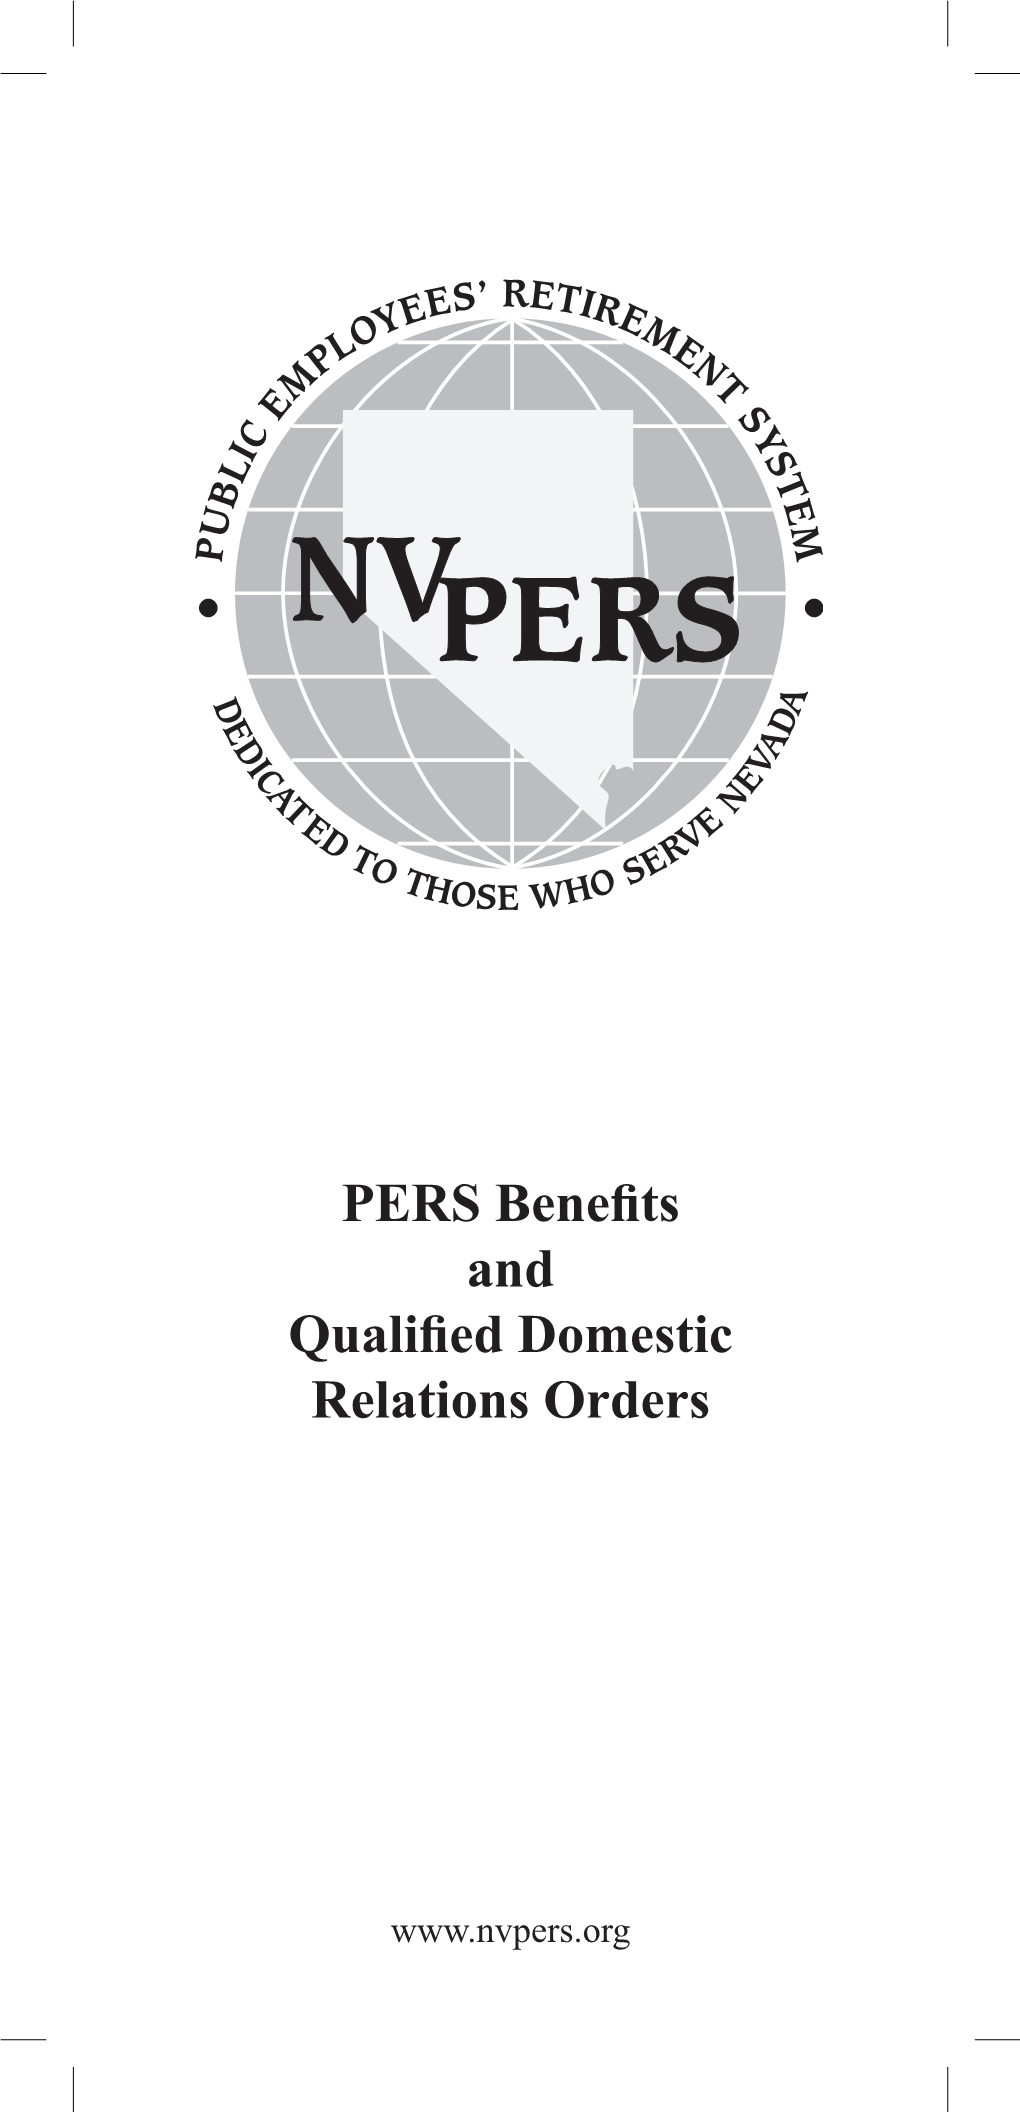 PERS Benefits and Qualified Domestic Relations Orders